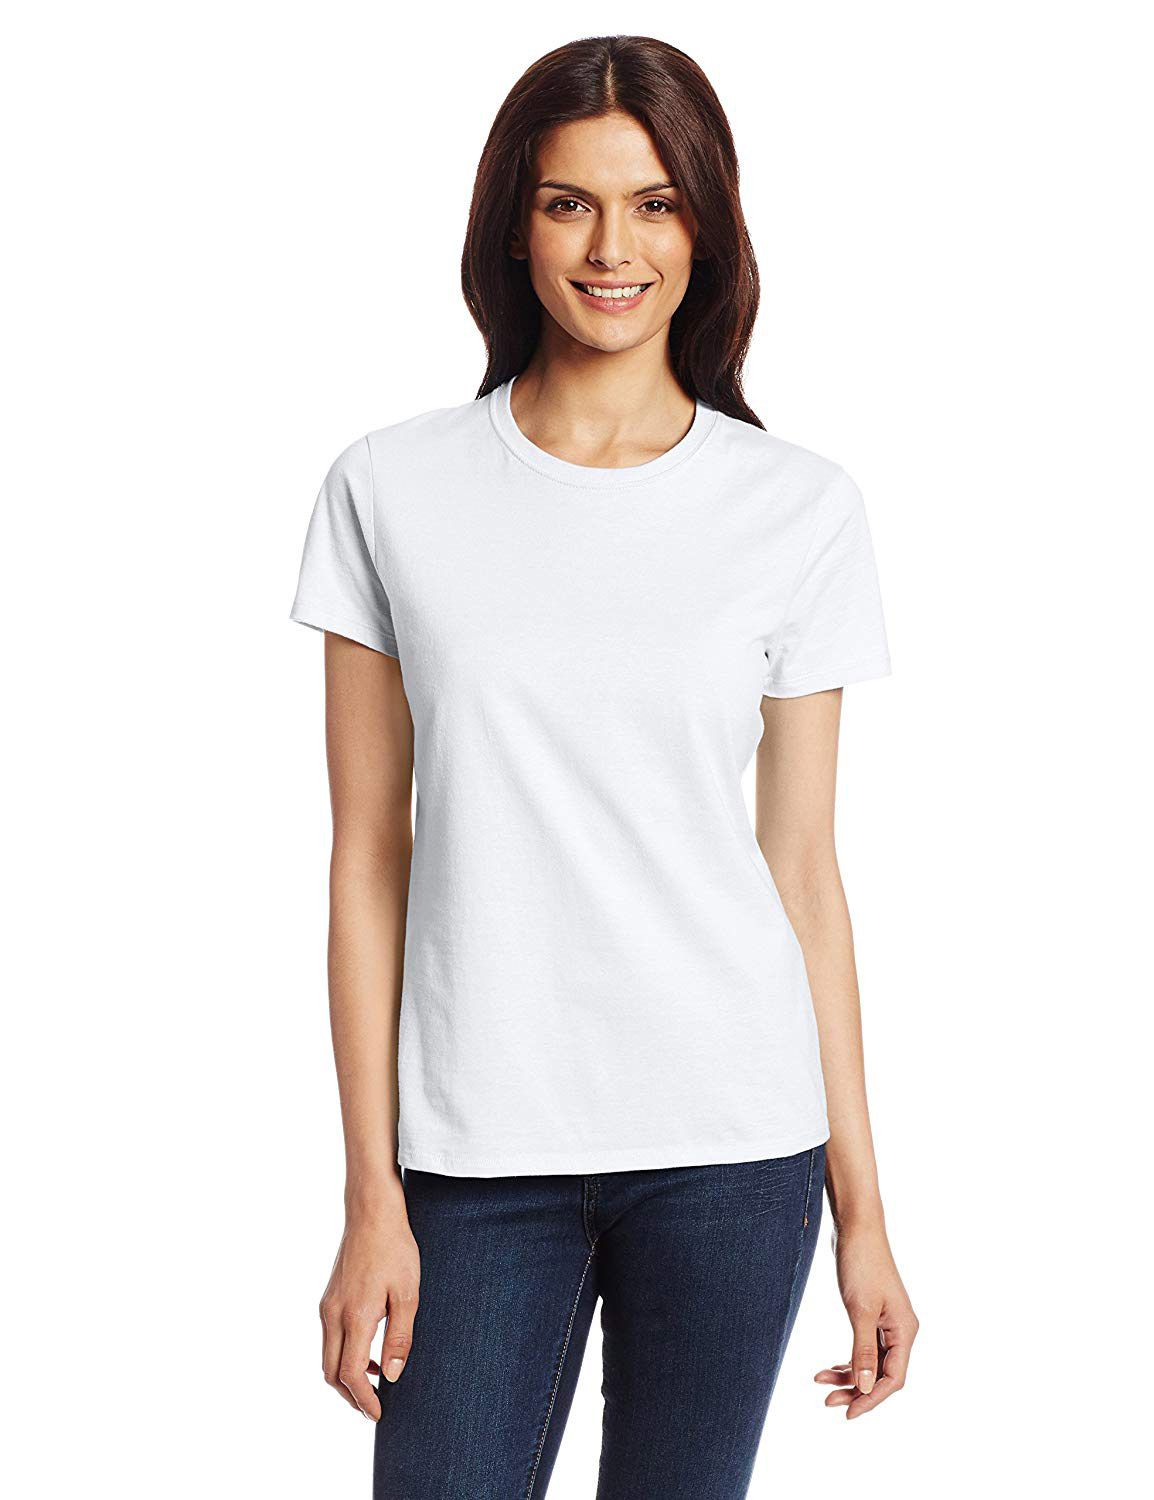 8 Best White T-Shirts You Can Buy on Amazon | PEOPLE.com